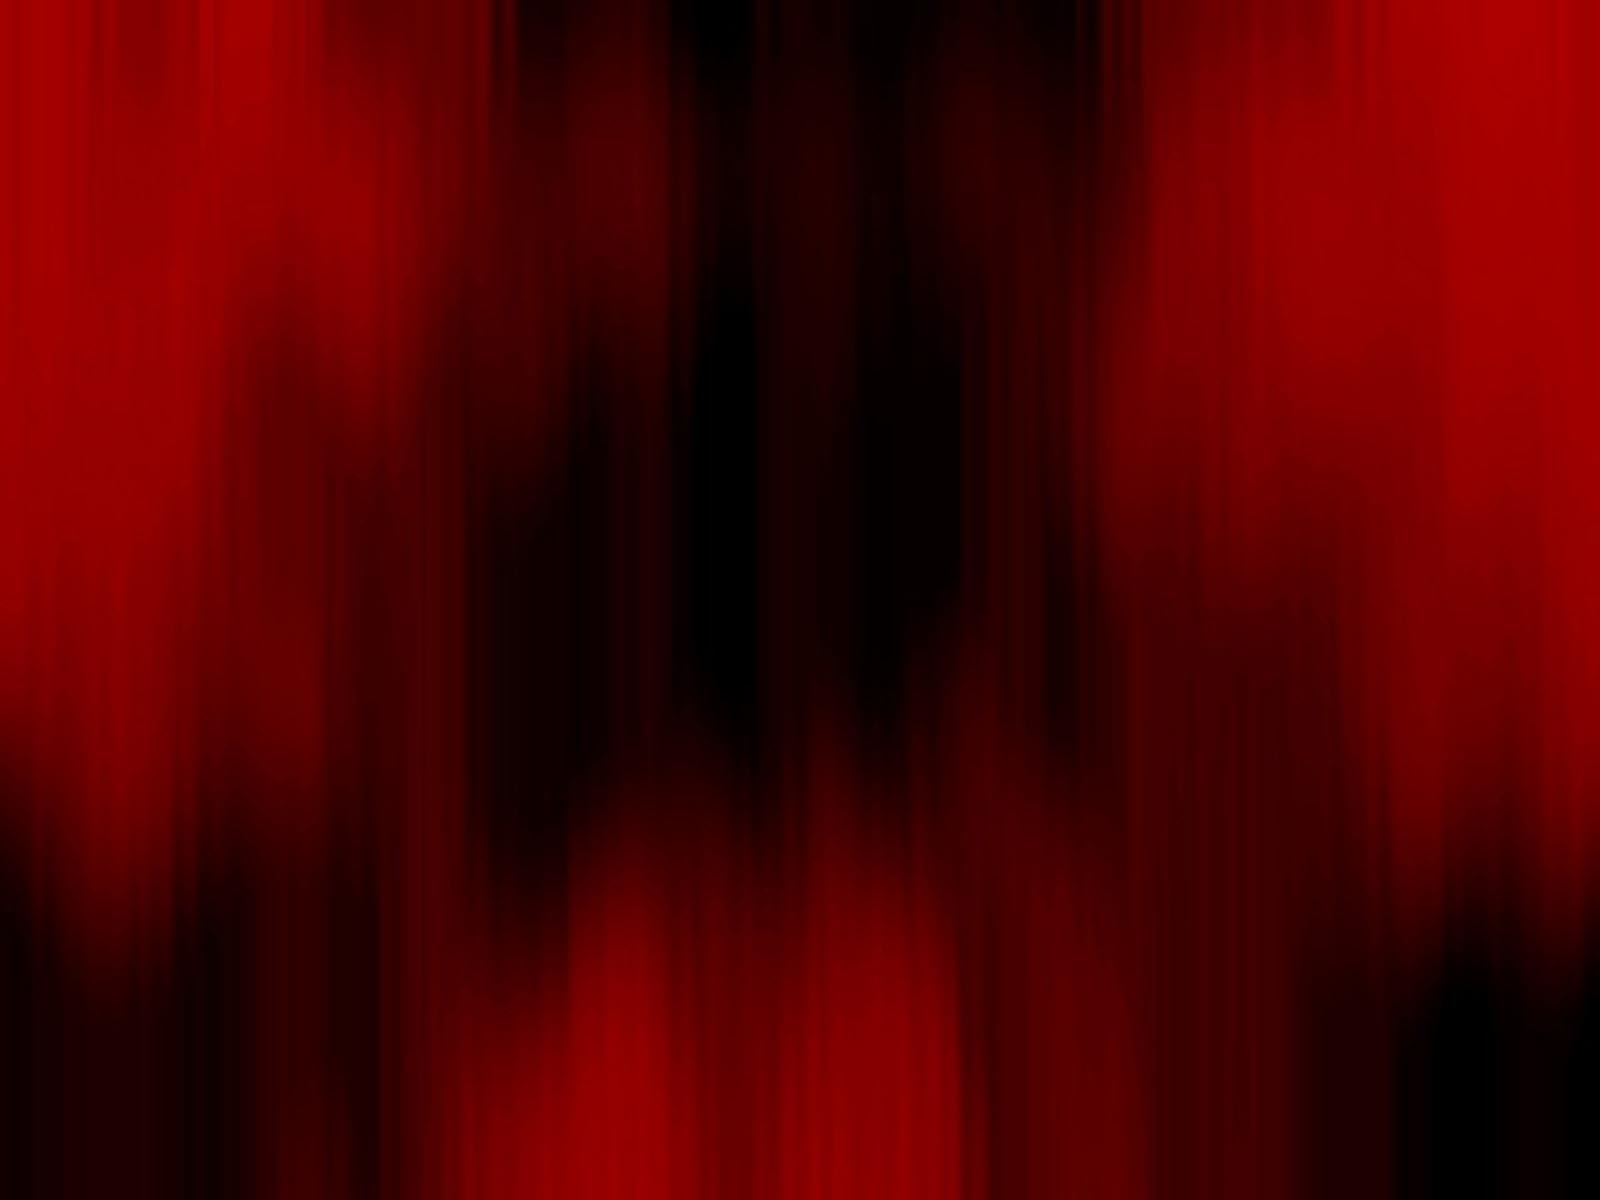 We Hope You Enjoy This Streaky Black And Red Wallpaper